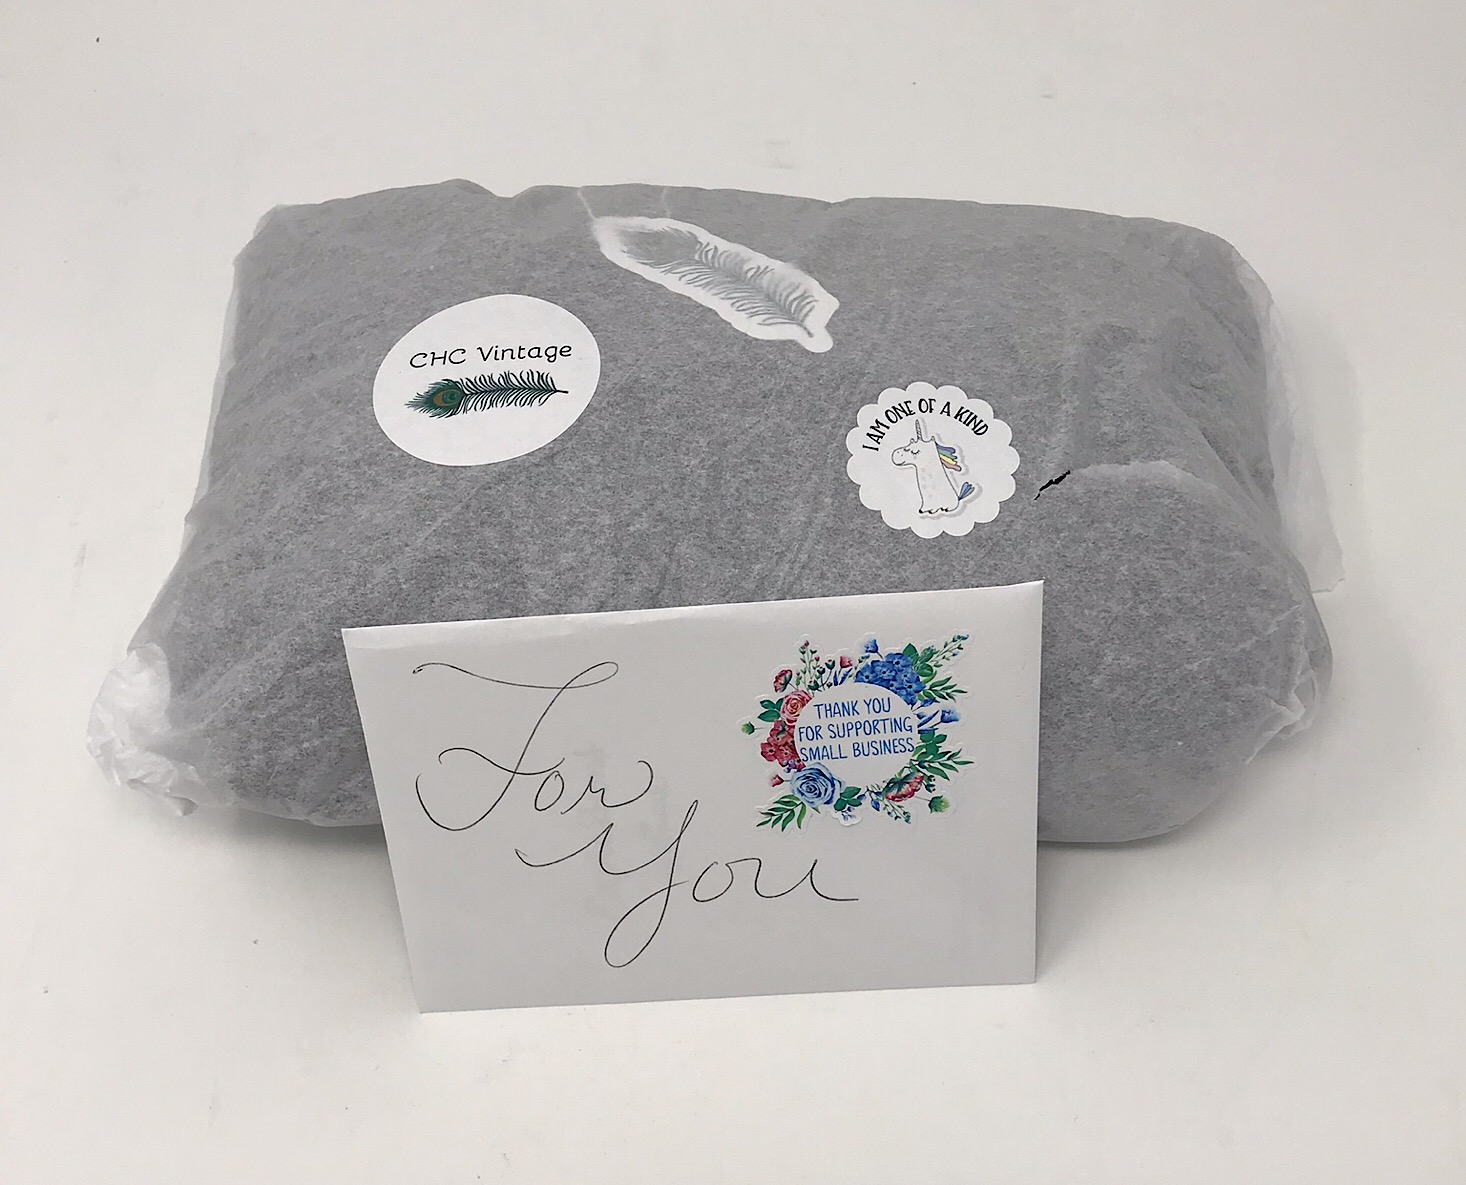 CHC Vintage Clothing Subscription Box Review – December 2018